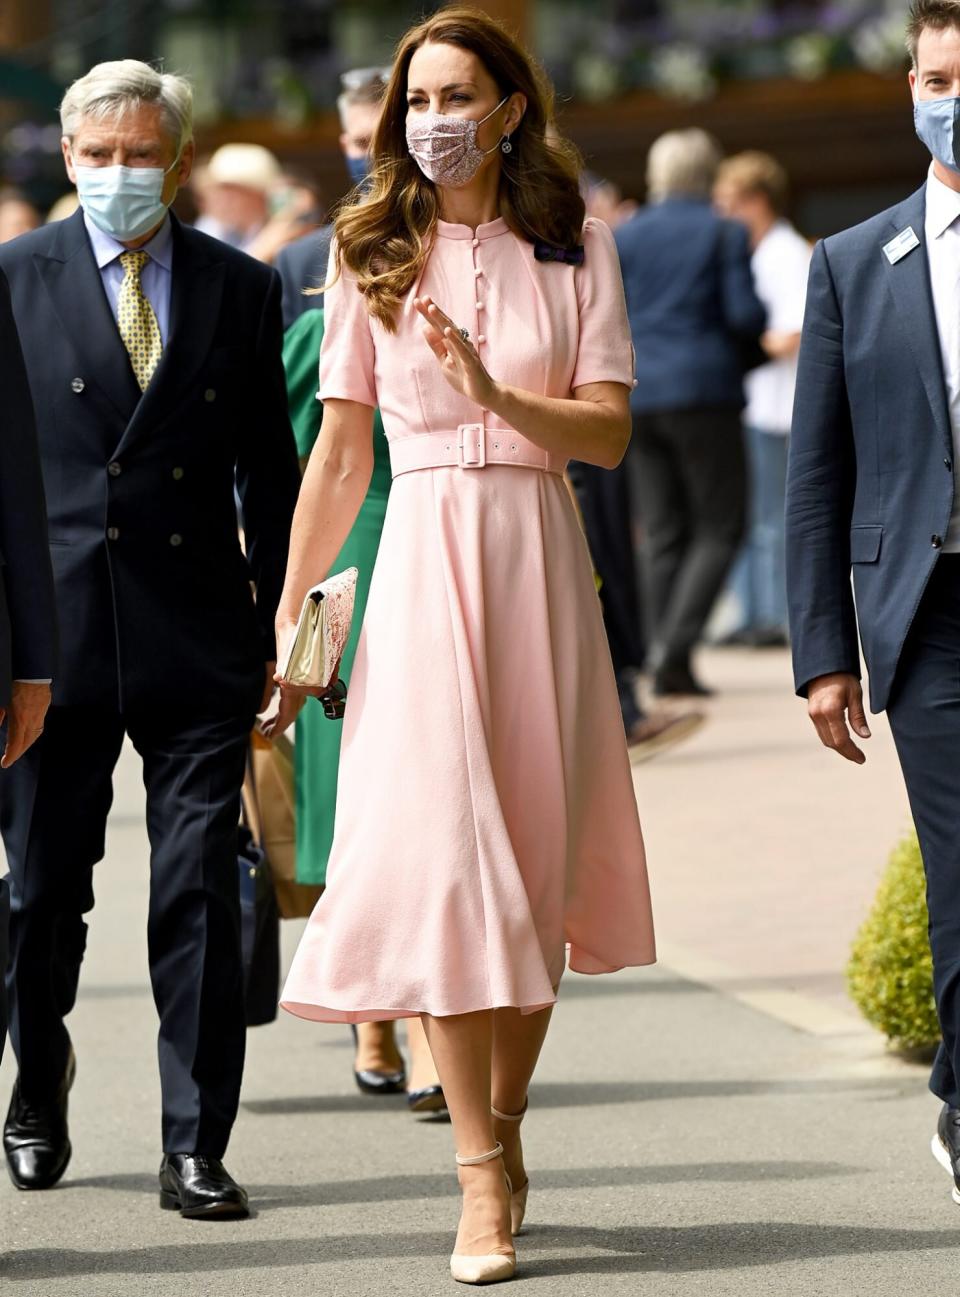 LONDON, ENGLAND - JULY 11: HRH Catherine, Duchess of Cambridge attends Wimbledon Championships Tennis Tournament at All England Lawn Tennis and Croquet Club on July 11, 2021 in London, England.